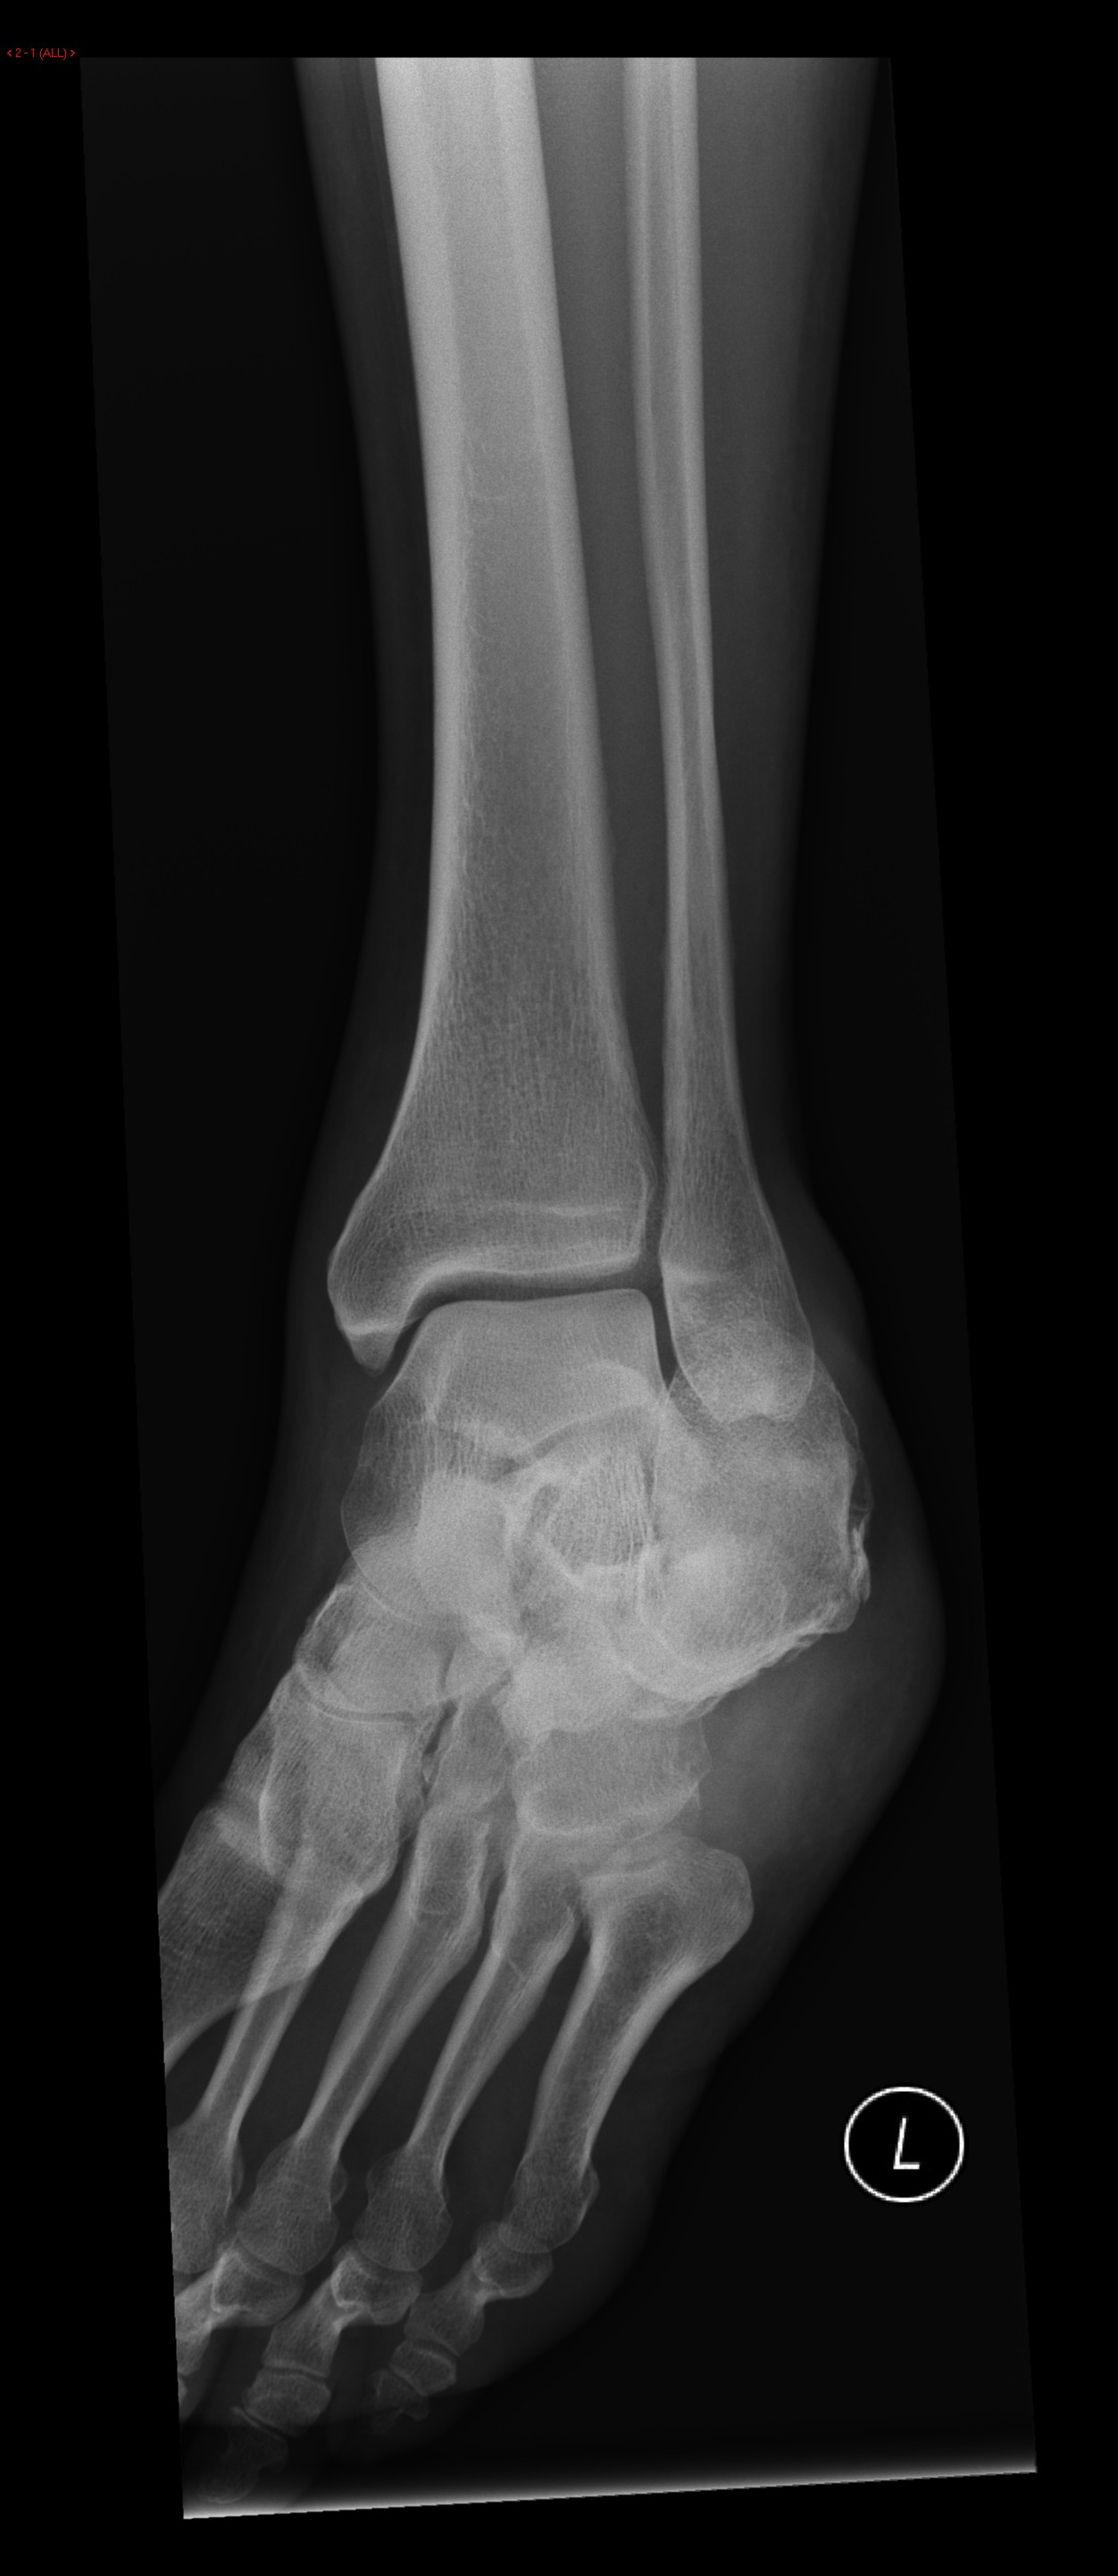 File:Calcaneal-fracture-and-associated-spinal-injury (3).jpg